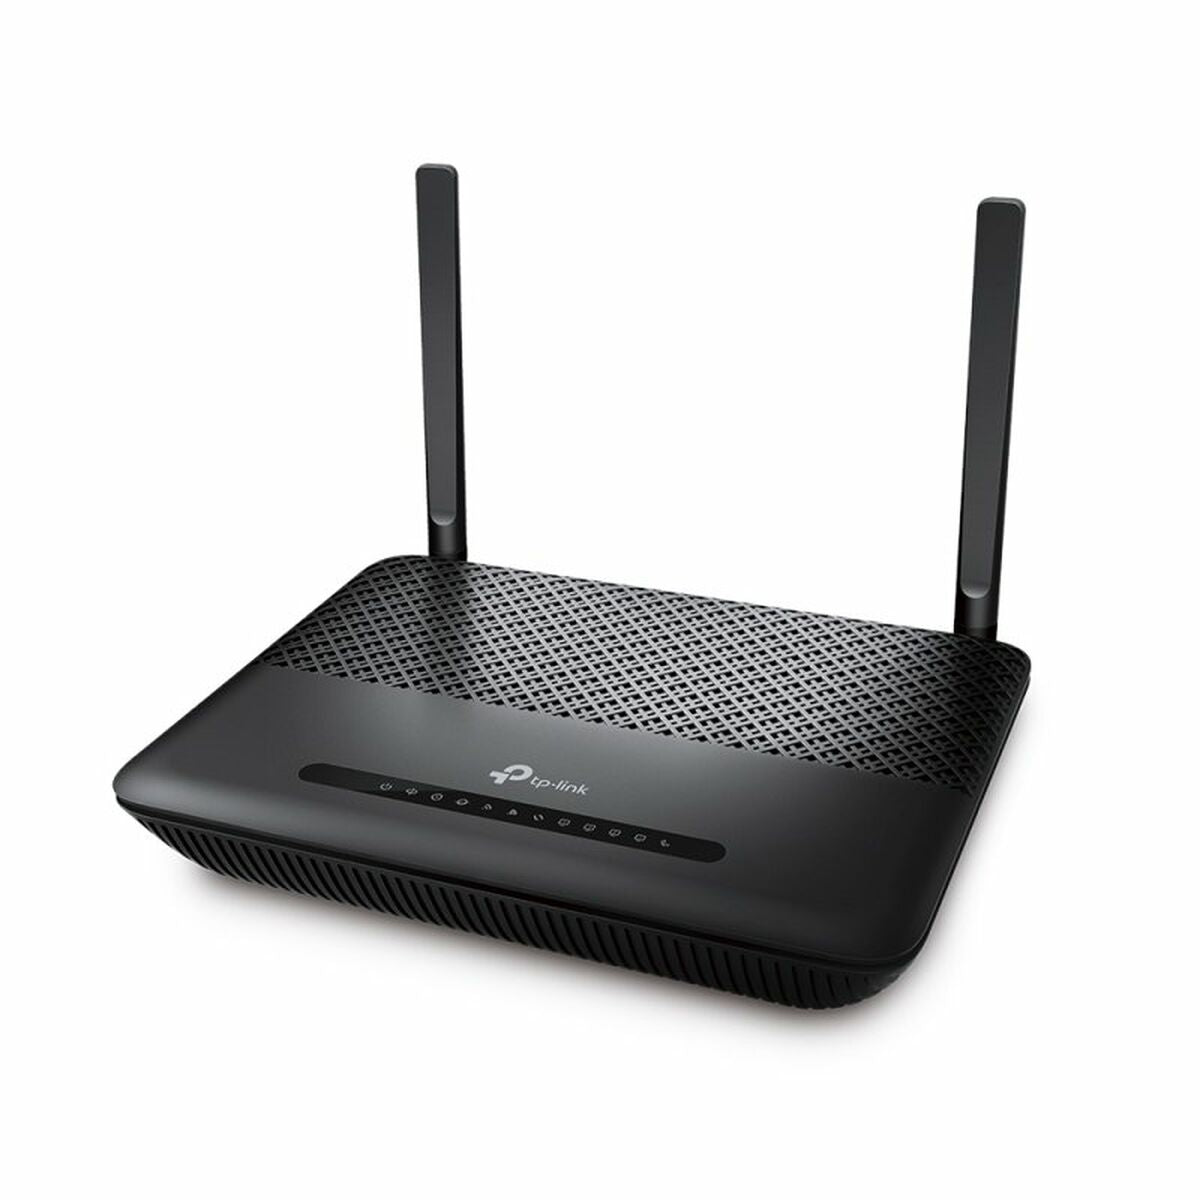 Router TP-Link XC220-G3v, TP-Link, Computing, Network devices, router-tp-link-xc220-g3v, Brand_TP-Link, category-reference-2609, category-reference-2803, category-reference-2826, category-reference-t-19685, category-reference-t-19914, Condition_NEW, networks/wiring, Price_50 - 100, Teleworking, RiotNook